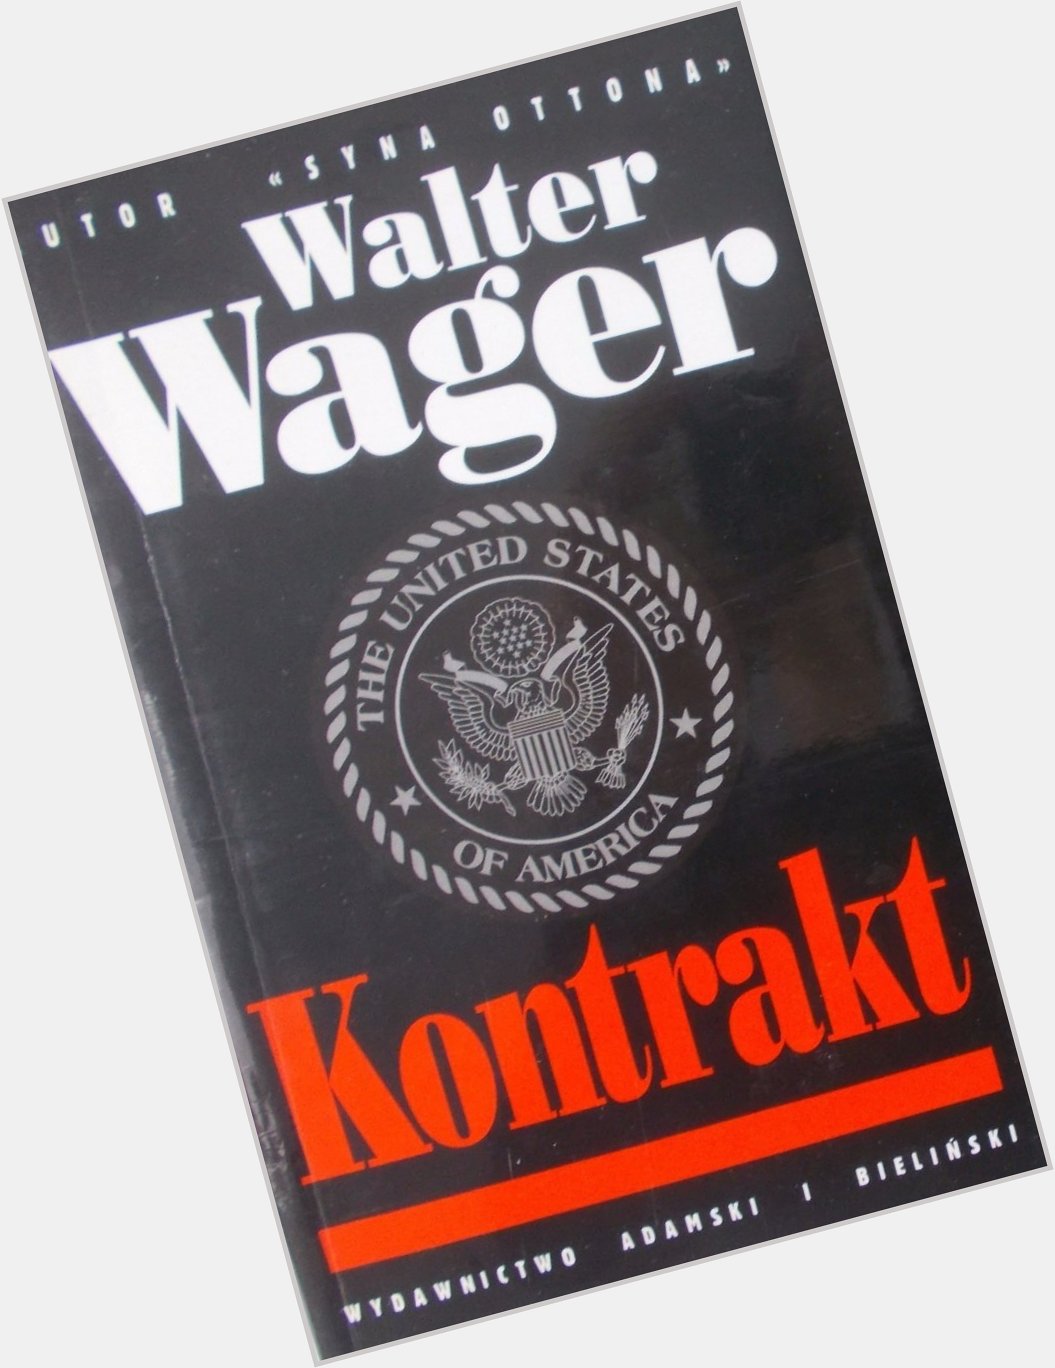 Walter Wager new pic 1.jpg